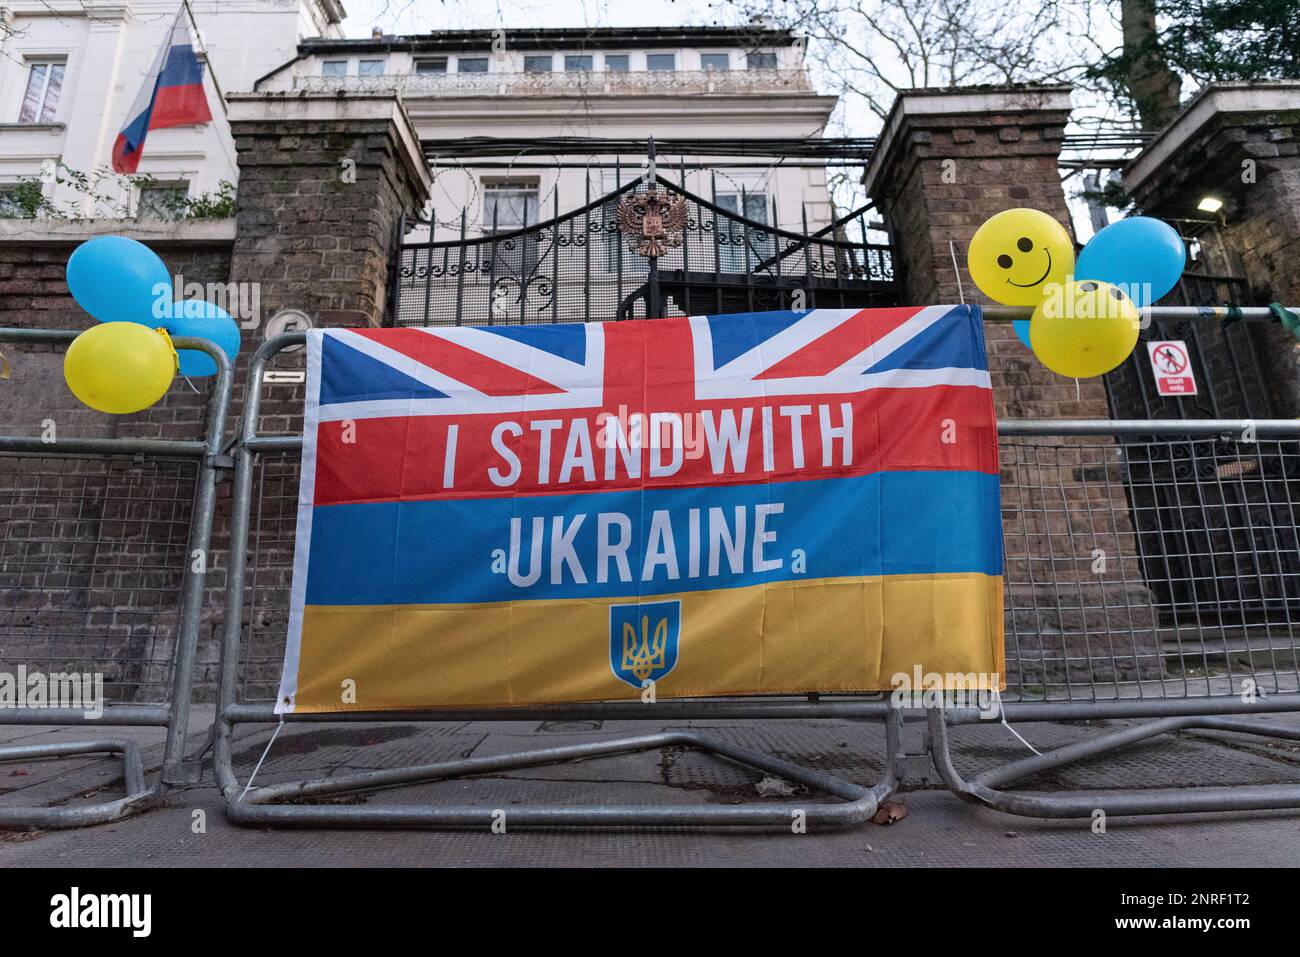 London, UK. 24 February, 2023. The entrance of the Embassy of Russian where a flag proclaiming 'I Stand With Ukraine' has been tied, along with baloon Stock Photo